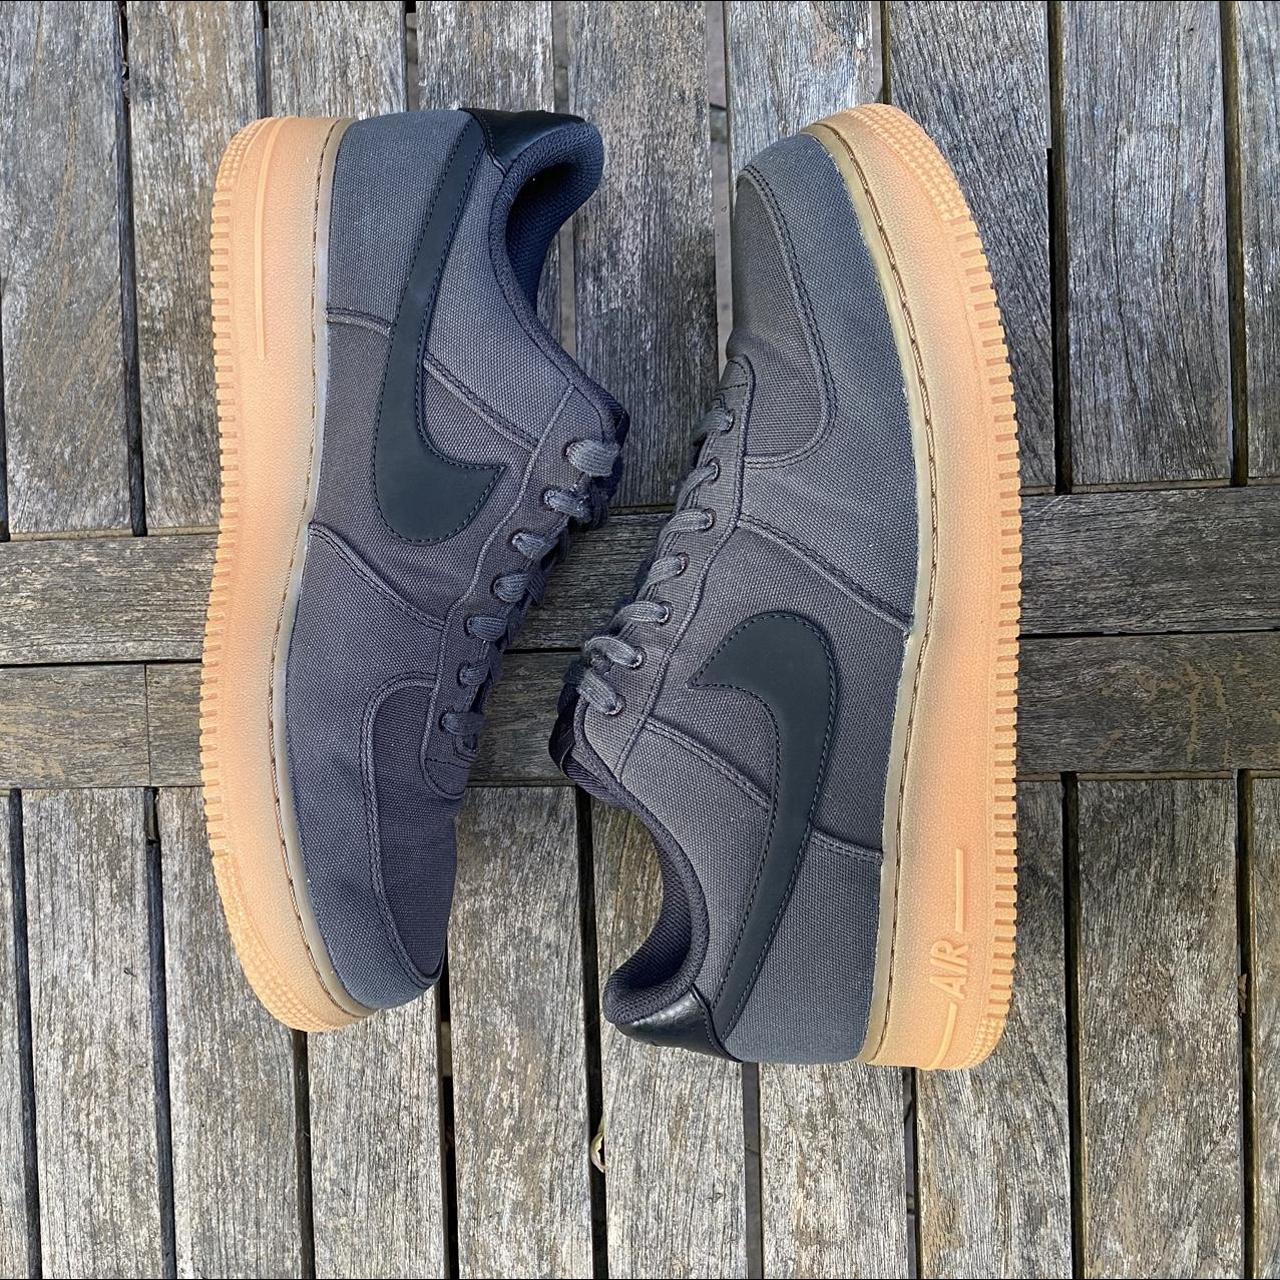 2019 Nike Air Force 1s LV8 Worn, but in amazing - Depop